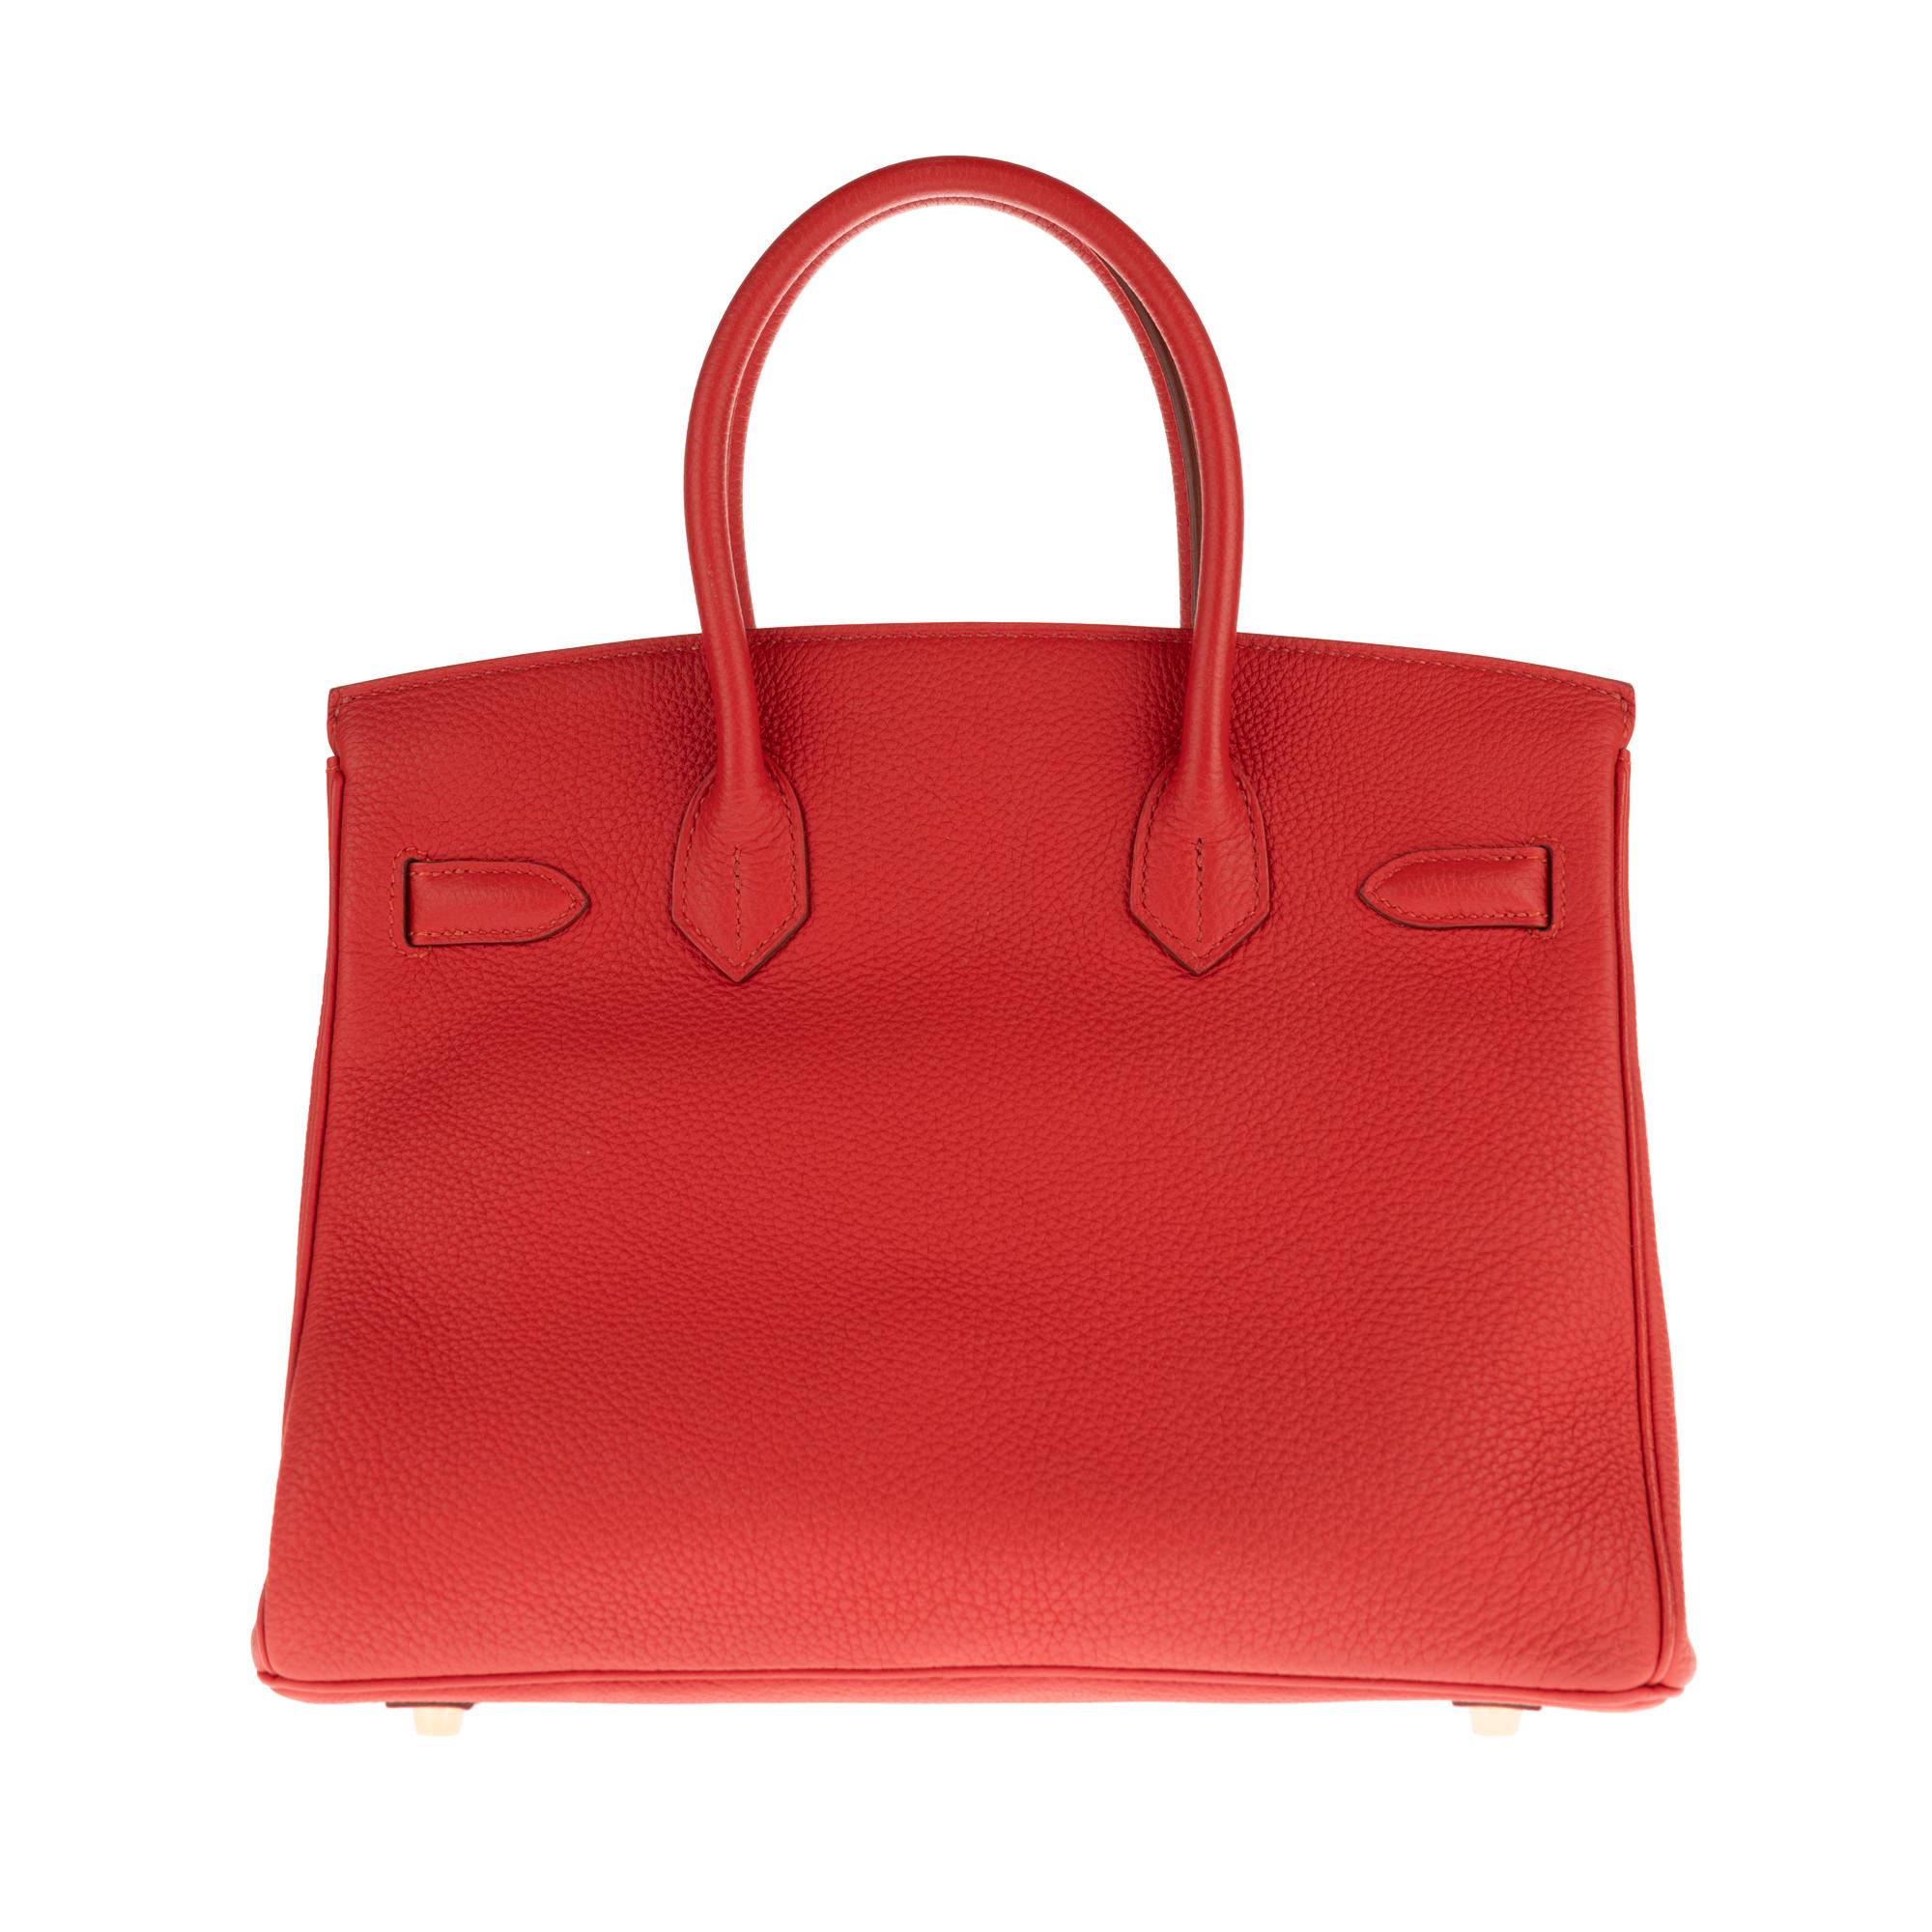 Superb handbag Hermes Birkin 30 cm in Red Togo leather , gold plated metal hardware, double handle in red leather allowing a handheld.

Closure by flap.
Red leather inner lining, one zipped pocket, one plated pocket.
Signature: 